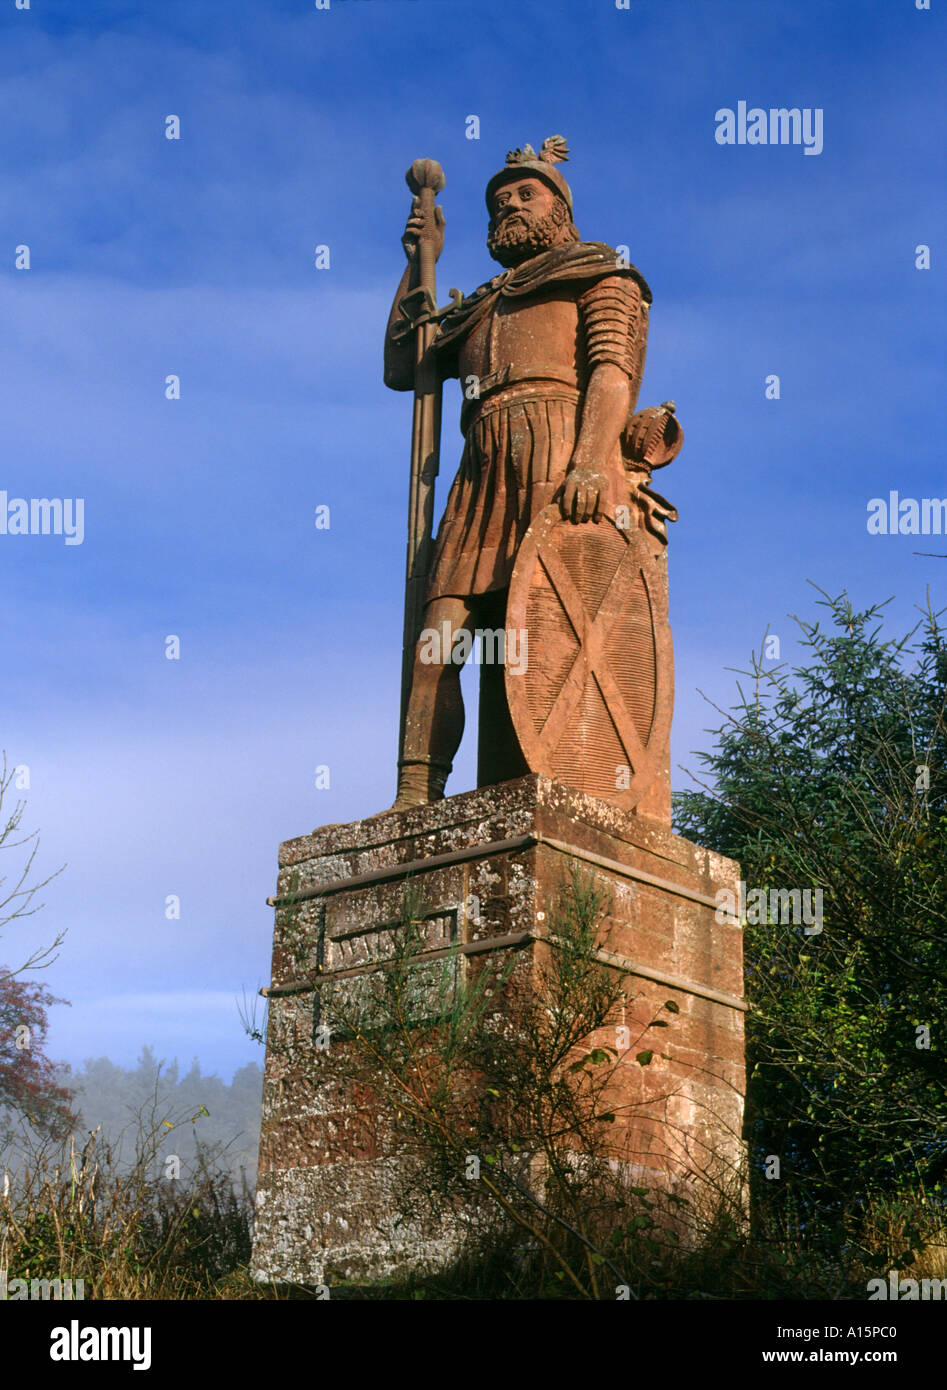 dh  WALLACE MONUMENT BORDERS William Wallace sand stone memorial statue scotland scottish historical figures historic monuments Stock Photo